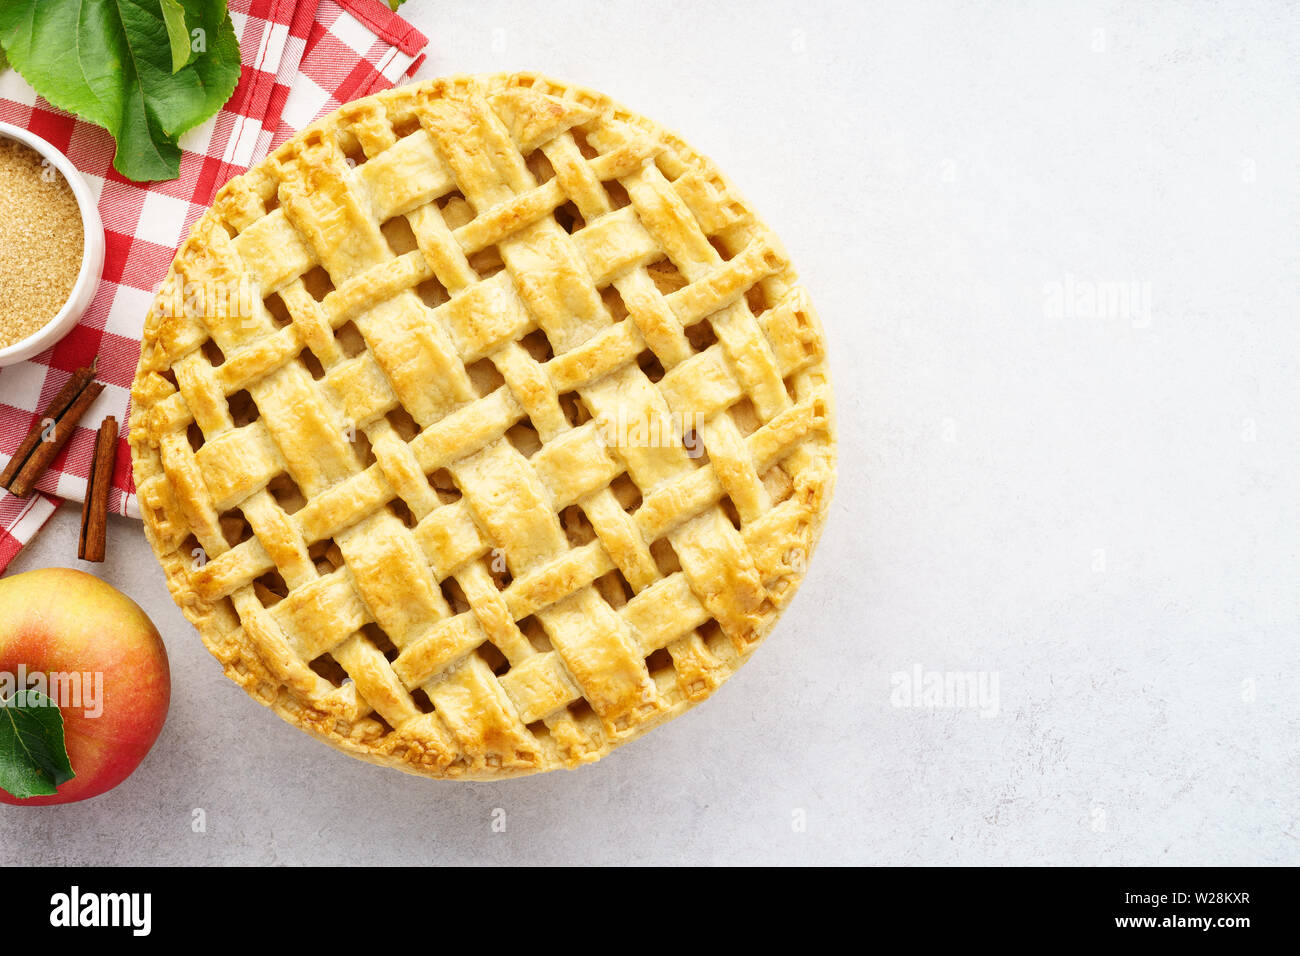 Baked apple pie and ingredients for cooking - sugar, apples, cinnamon. Seasonal pastry background with space for recipe. Stock Photo